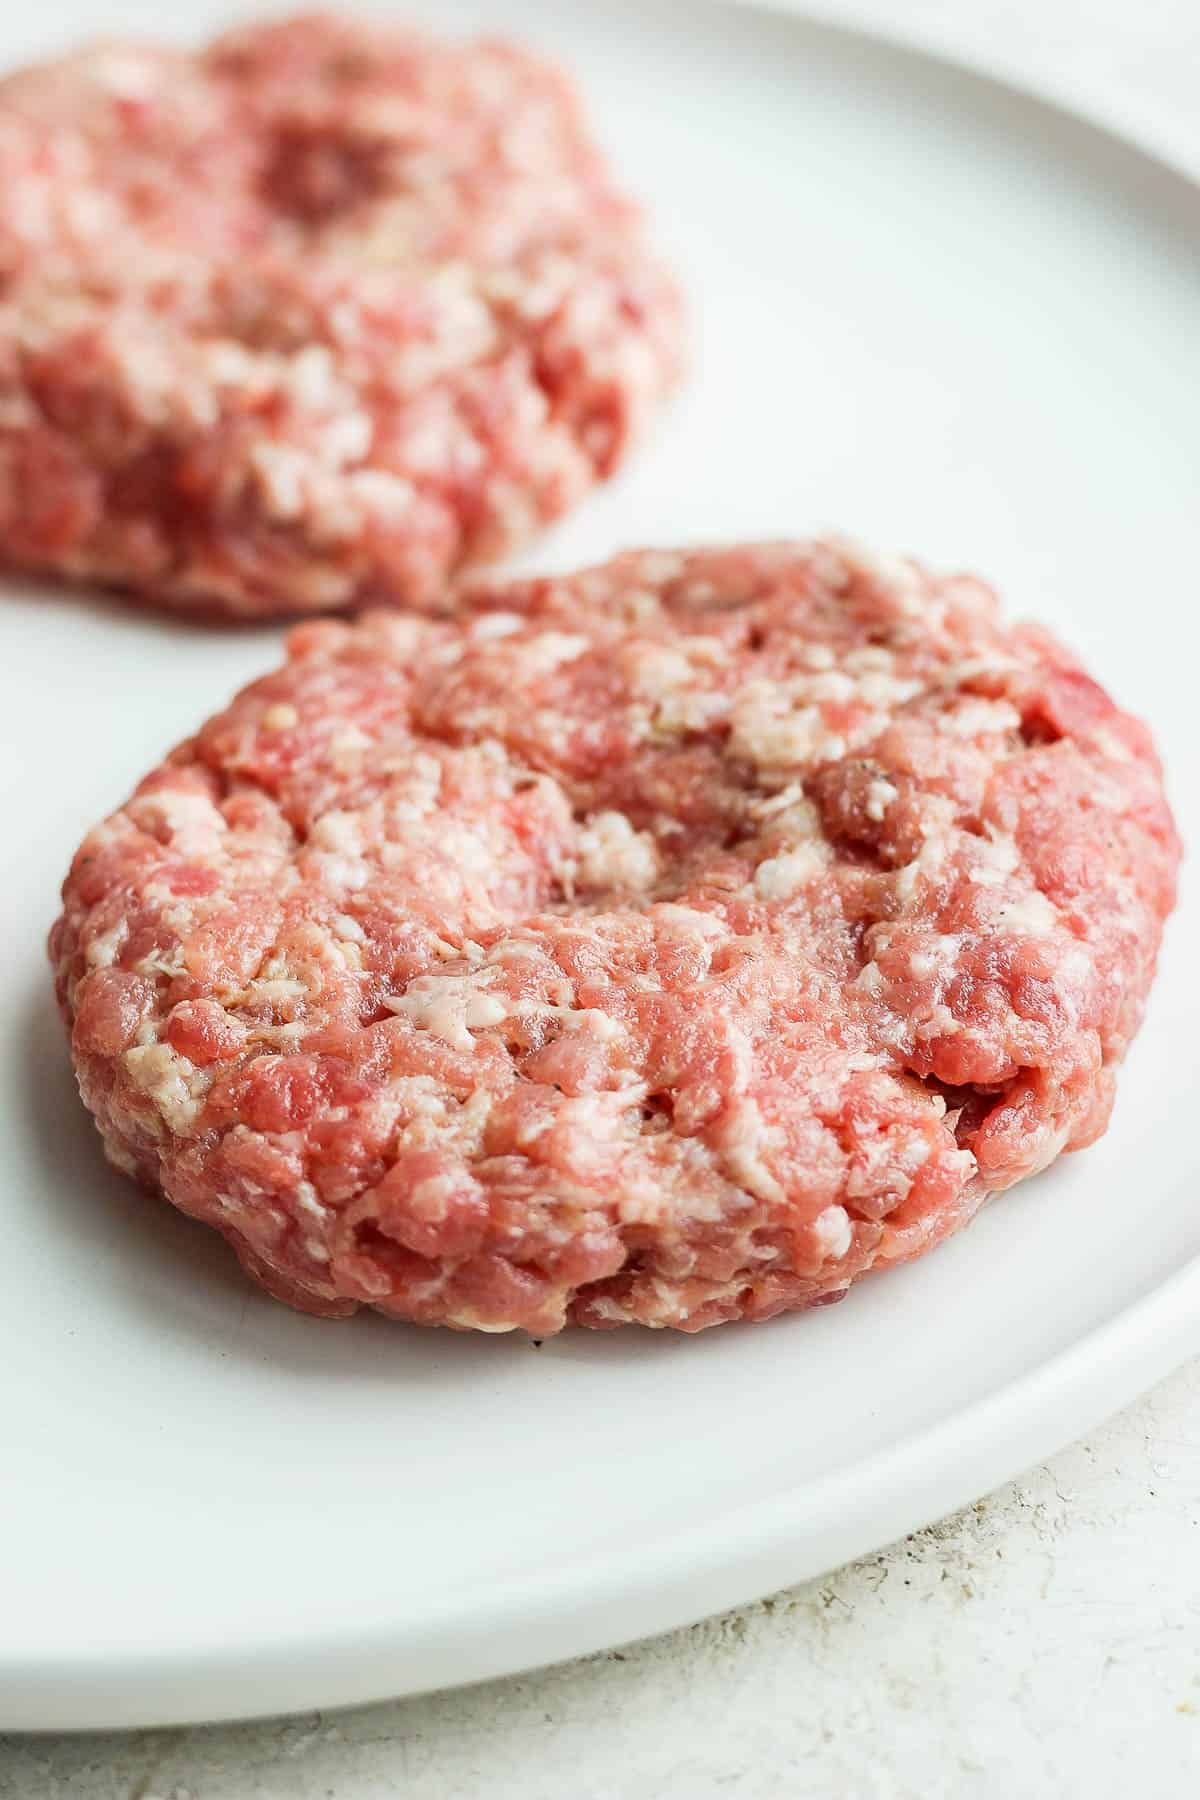 Pork burger patties on a white plate before cooking.